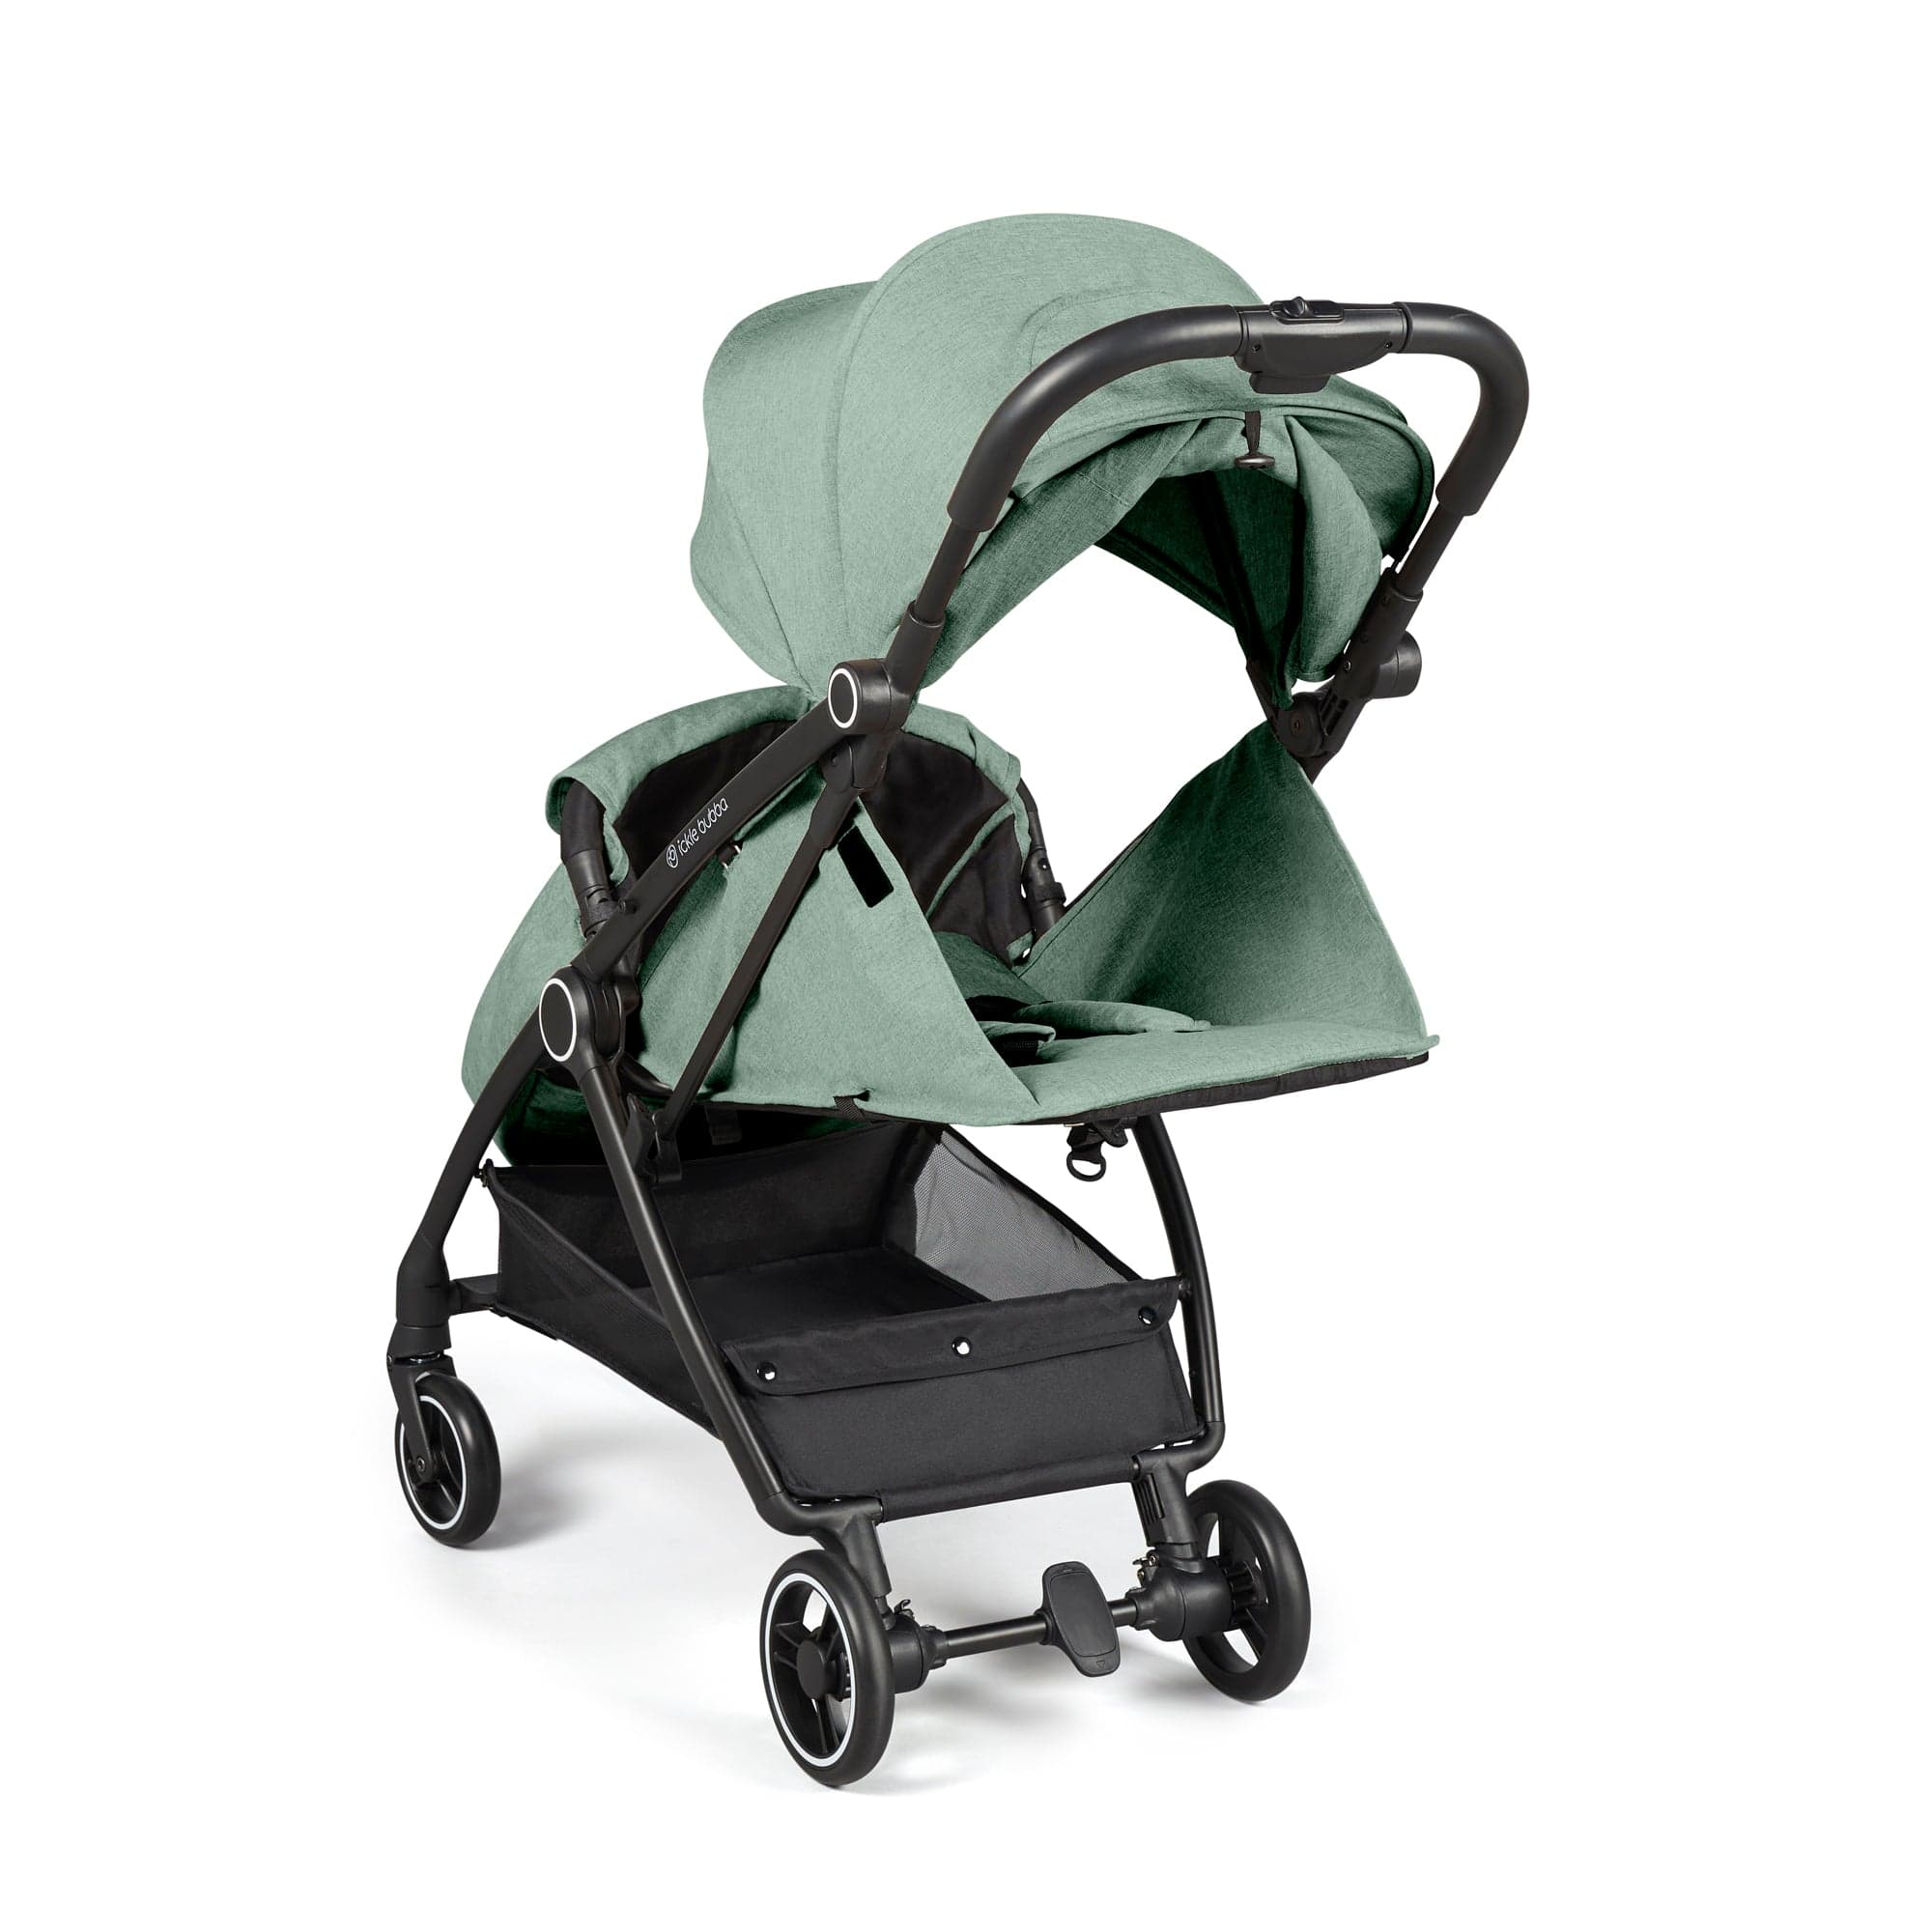 Ickle Bubba baby pushchairs Ickle Bubba Aries Max Autofold Stroller - Sage Green 15-005-200-152